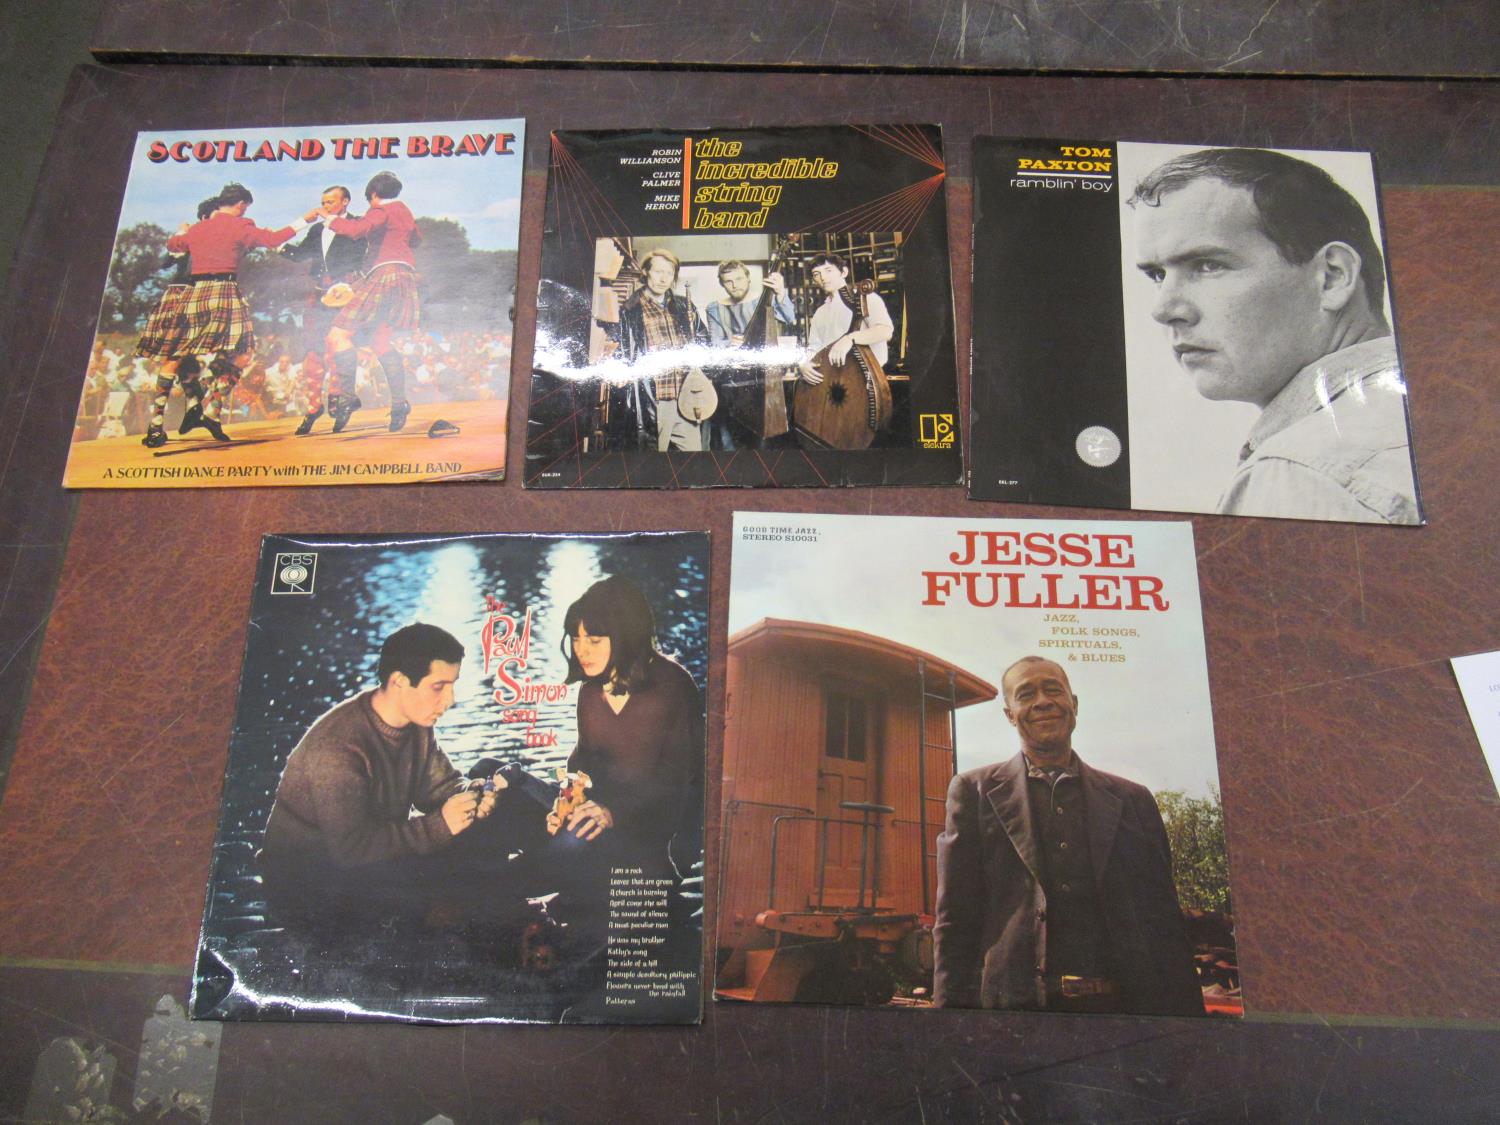 Collection of vinyl long playing records including Eric Clapton, Joan Baez and Tom Paxton - Image 6 of 6